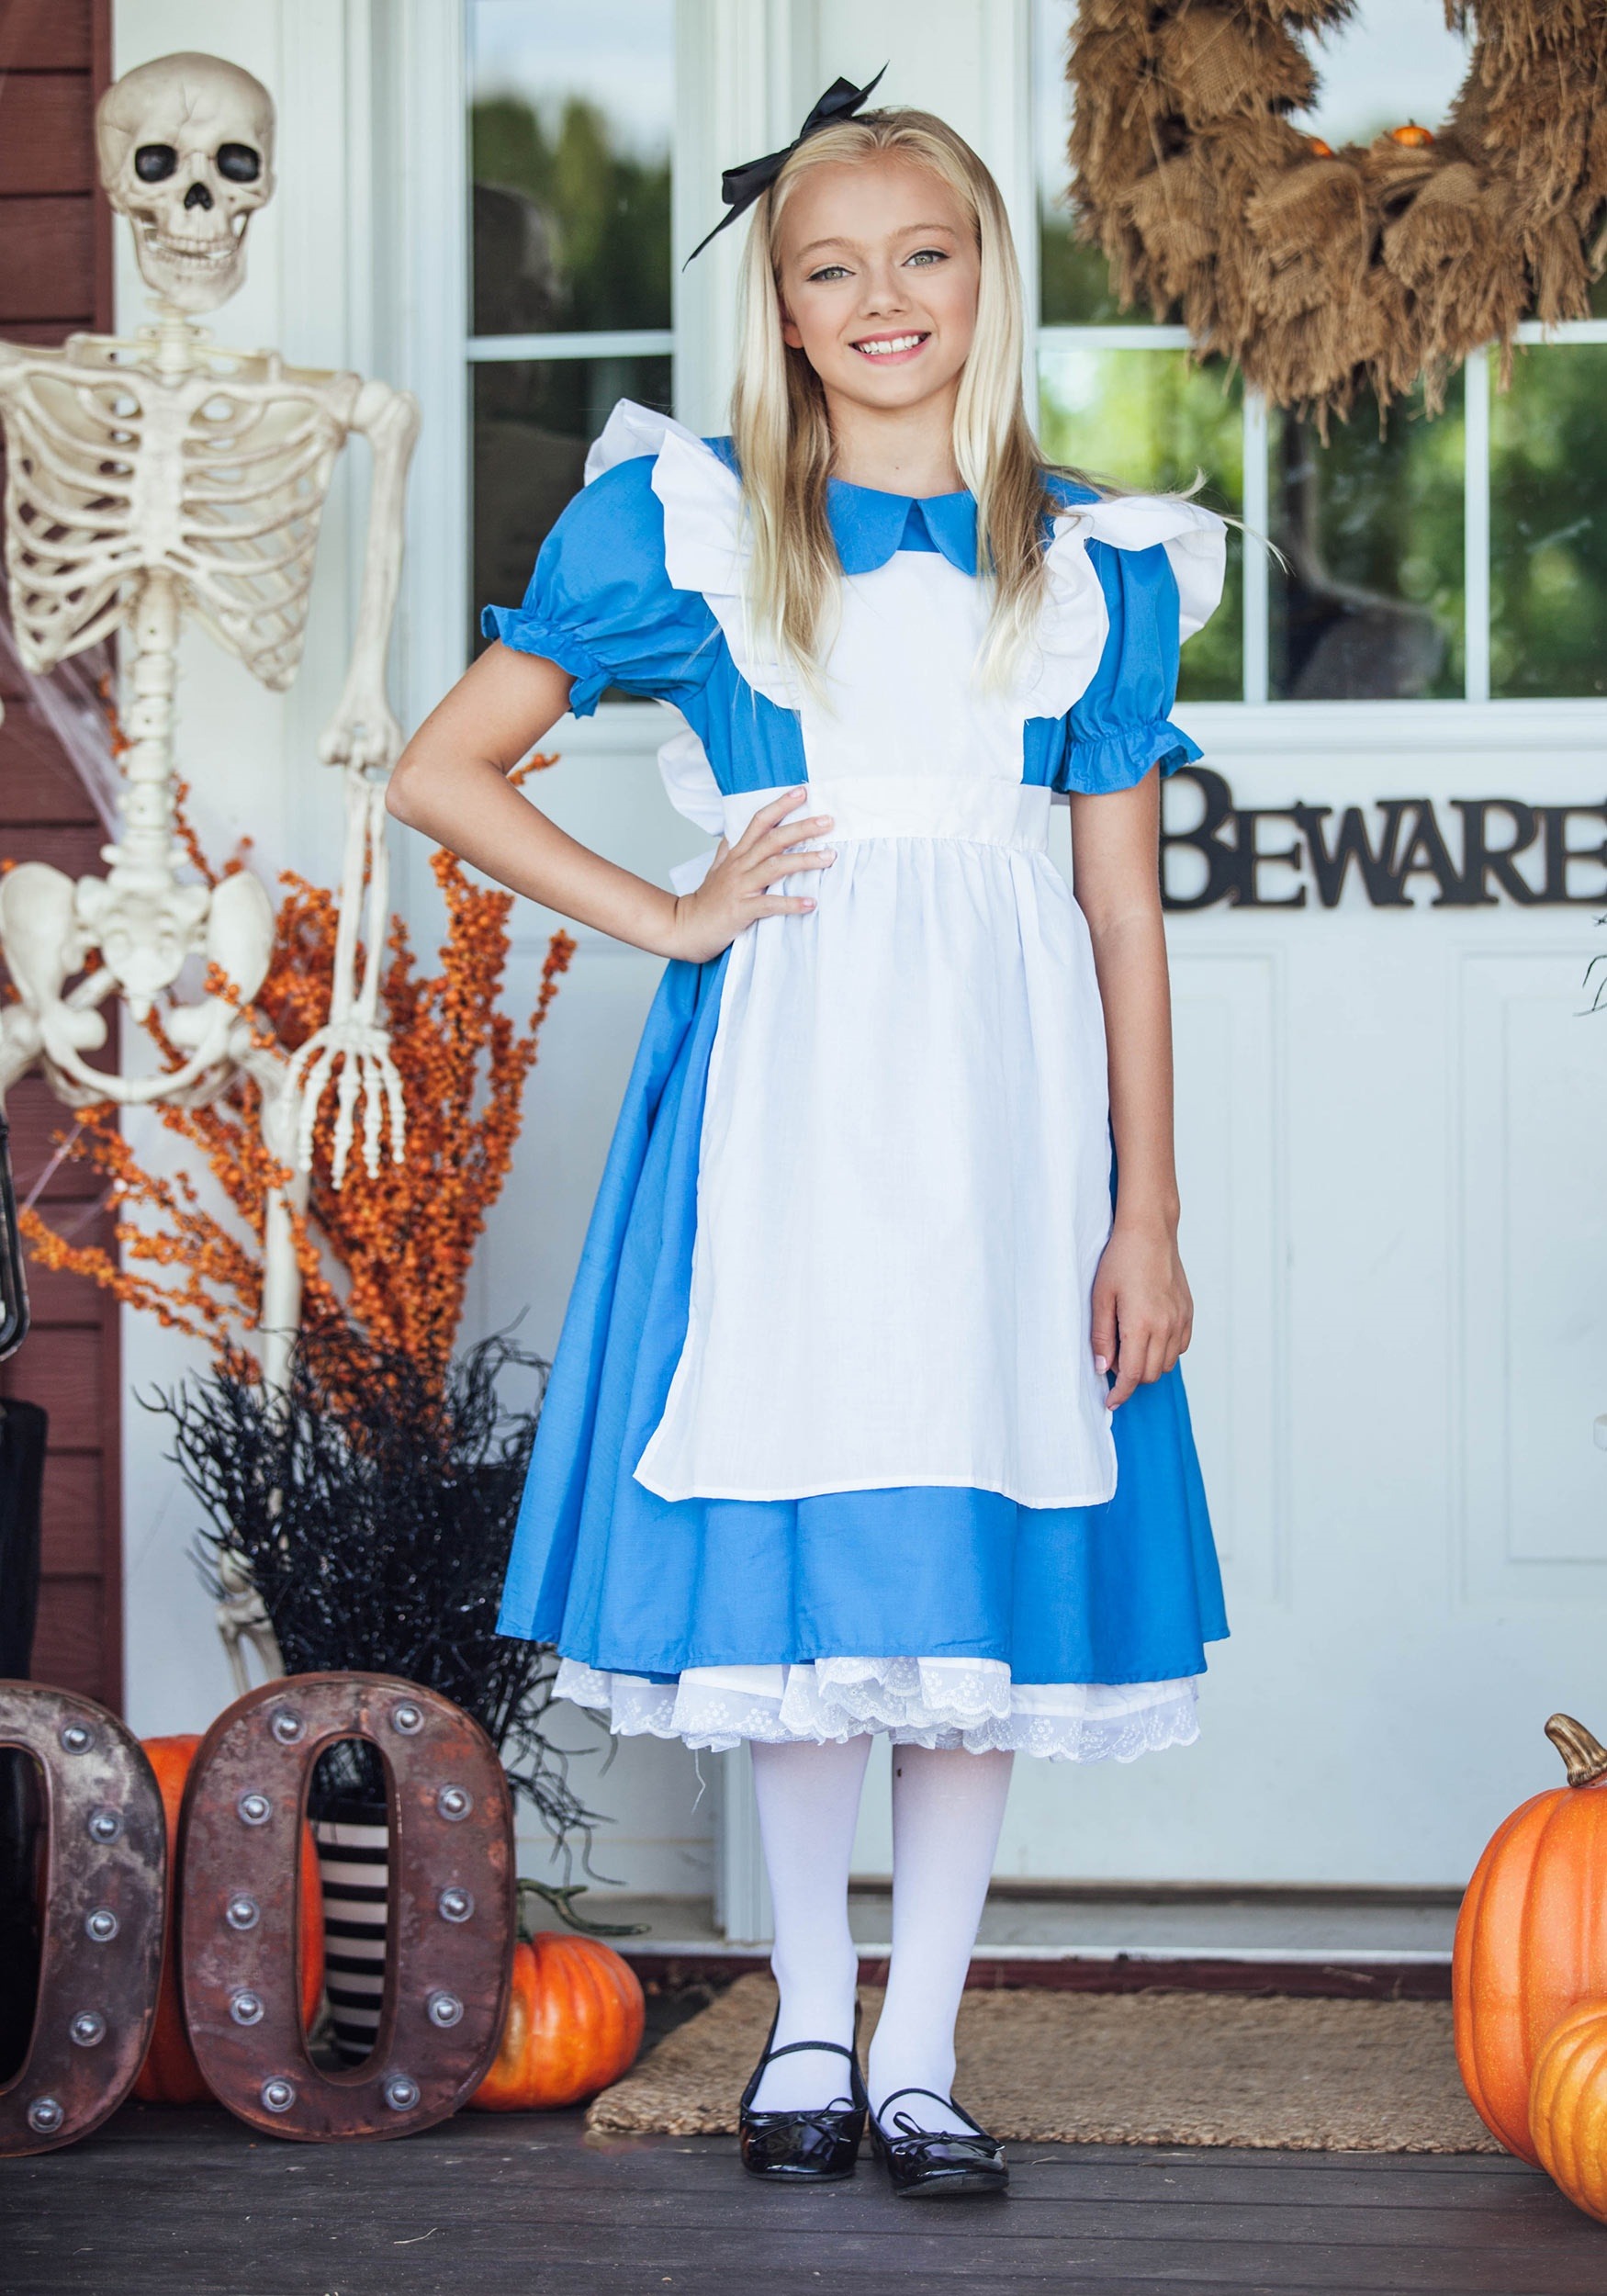 Fun Costumes Unisex-Adult Big Girls' Deluxe Alice, Size Small, Blue/White